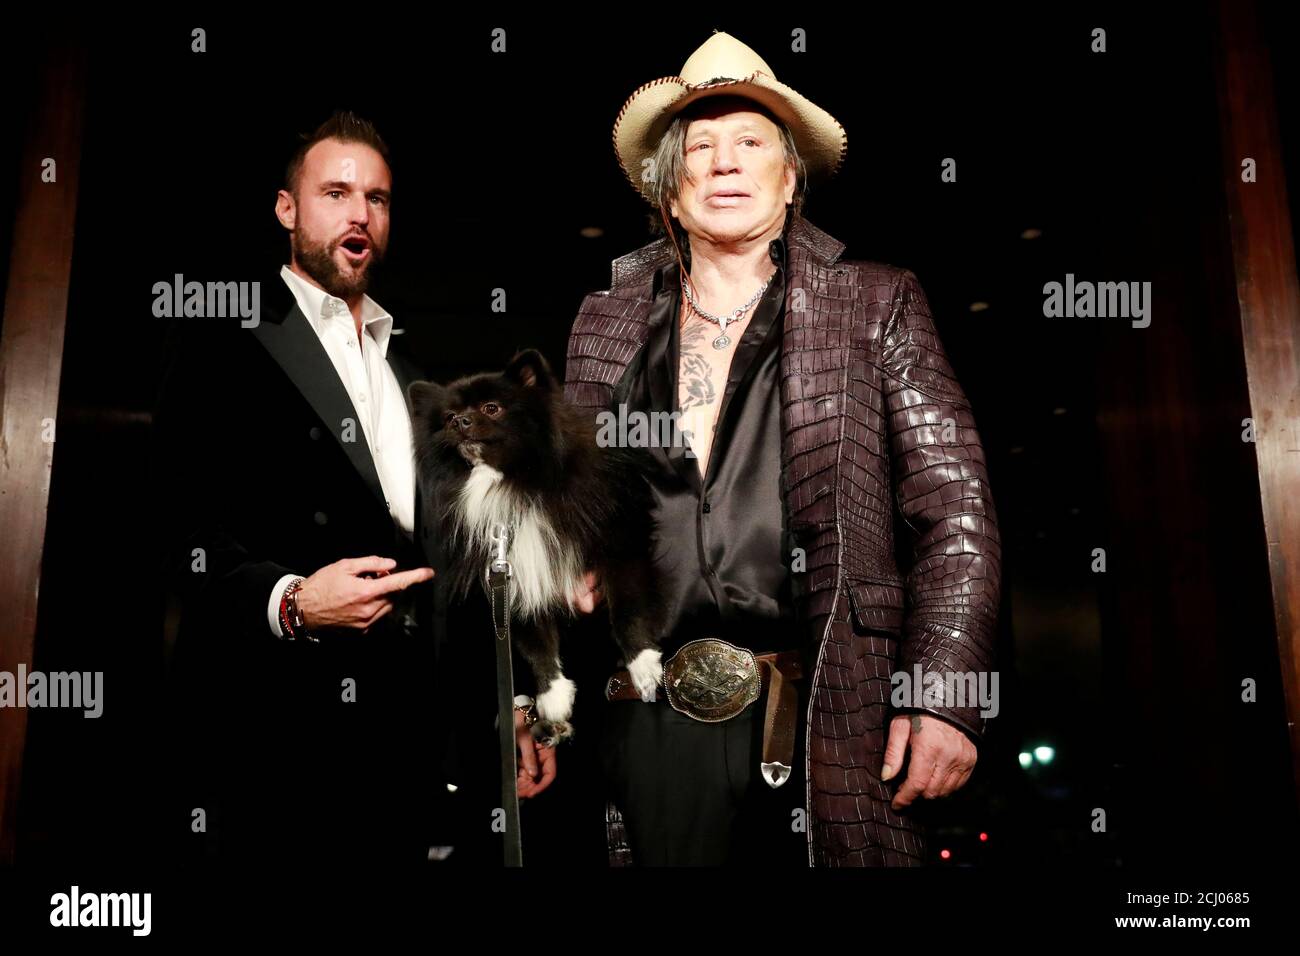 Designer Philipp Plein walks the runway with actor Mickey Rourke after  presenting the Billionaire Fall/Winter 19/20 collection by Philipp Plein  during New York Fashion Week in New York City, U.S., February 11,